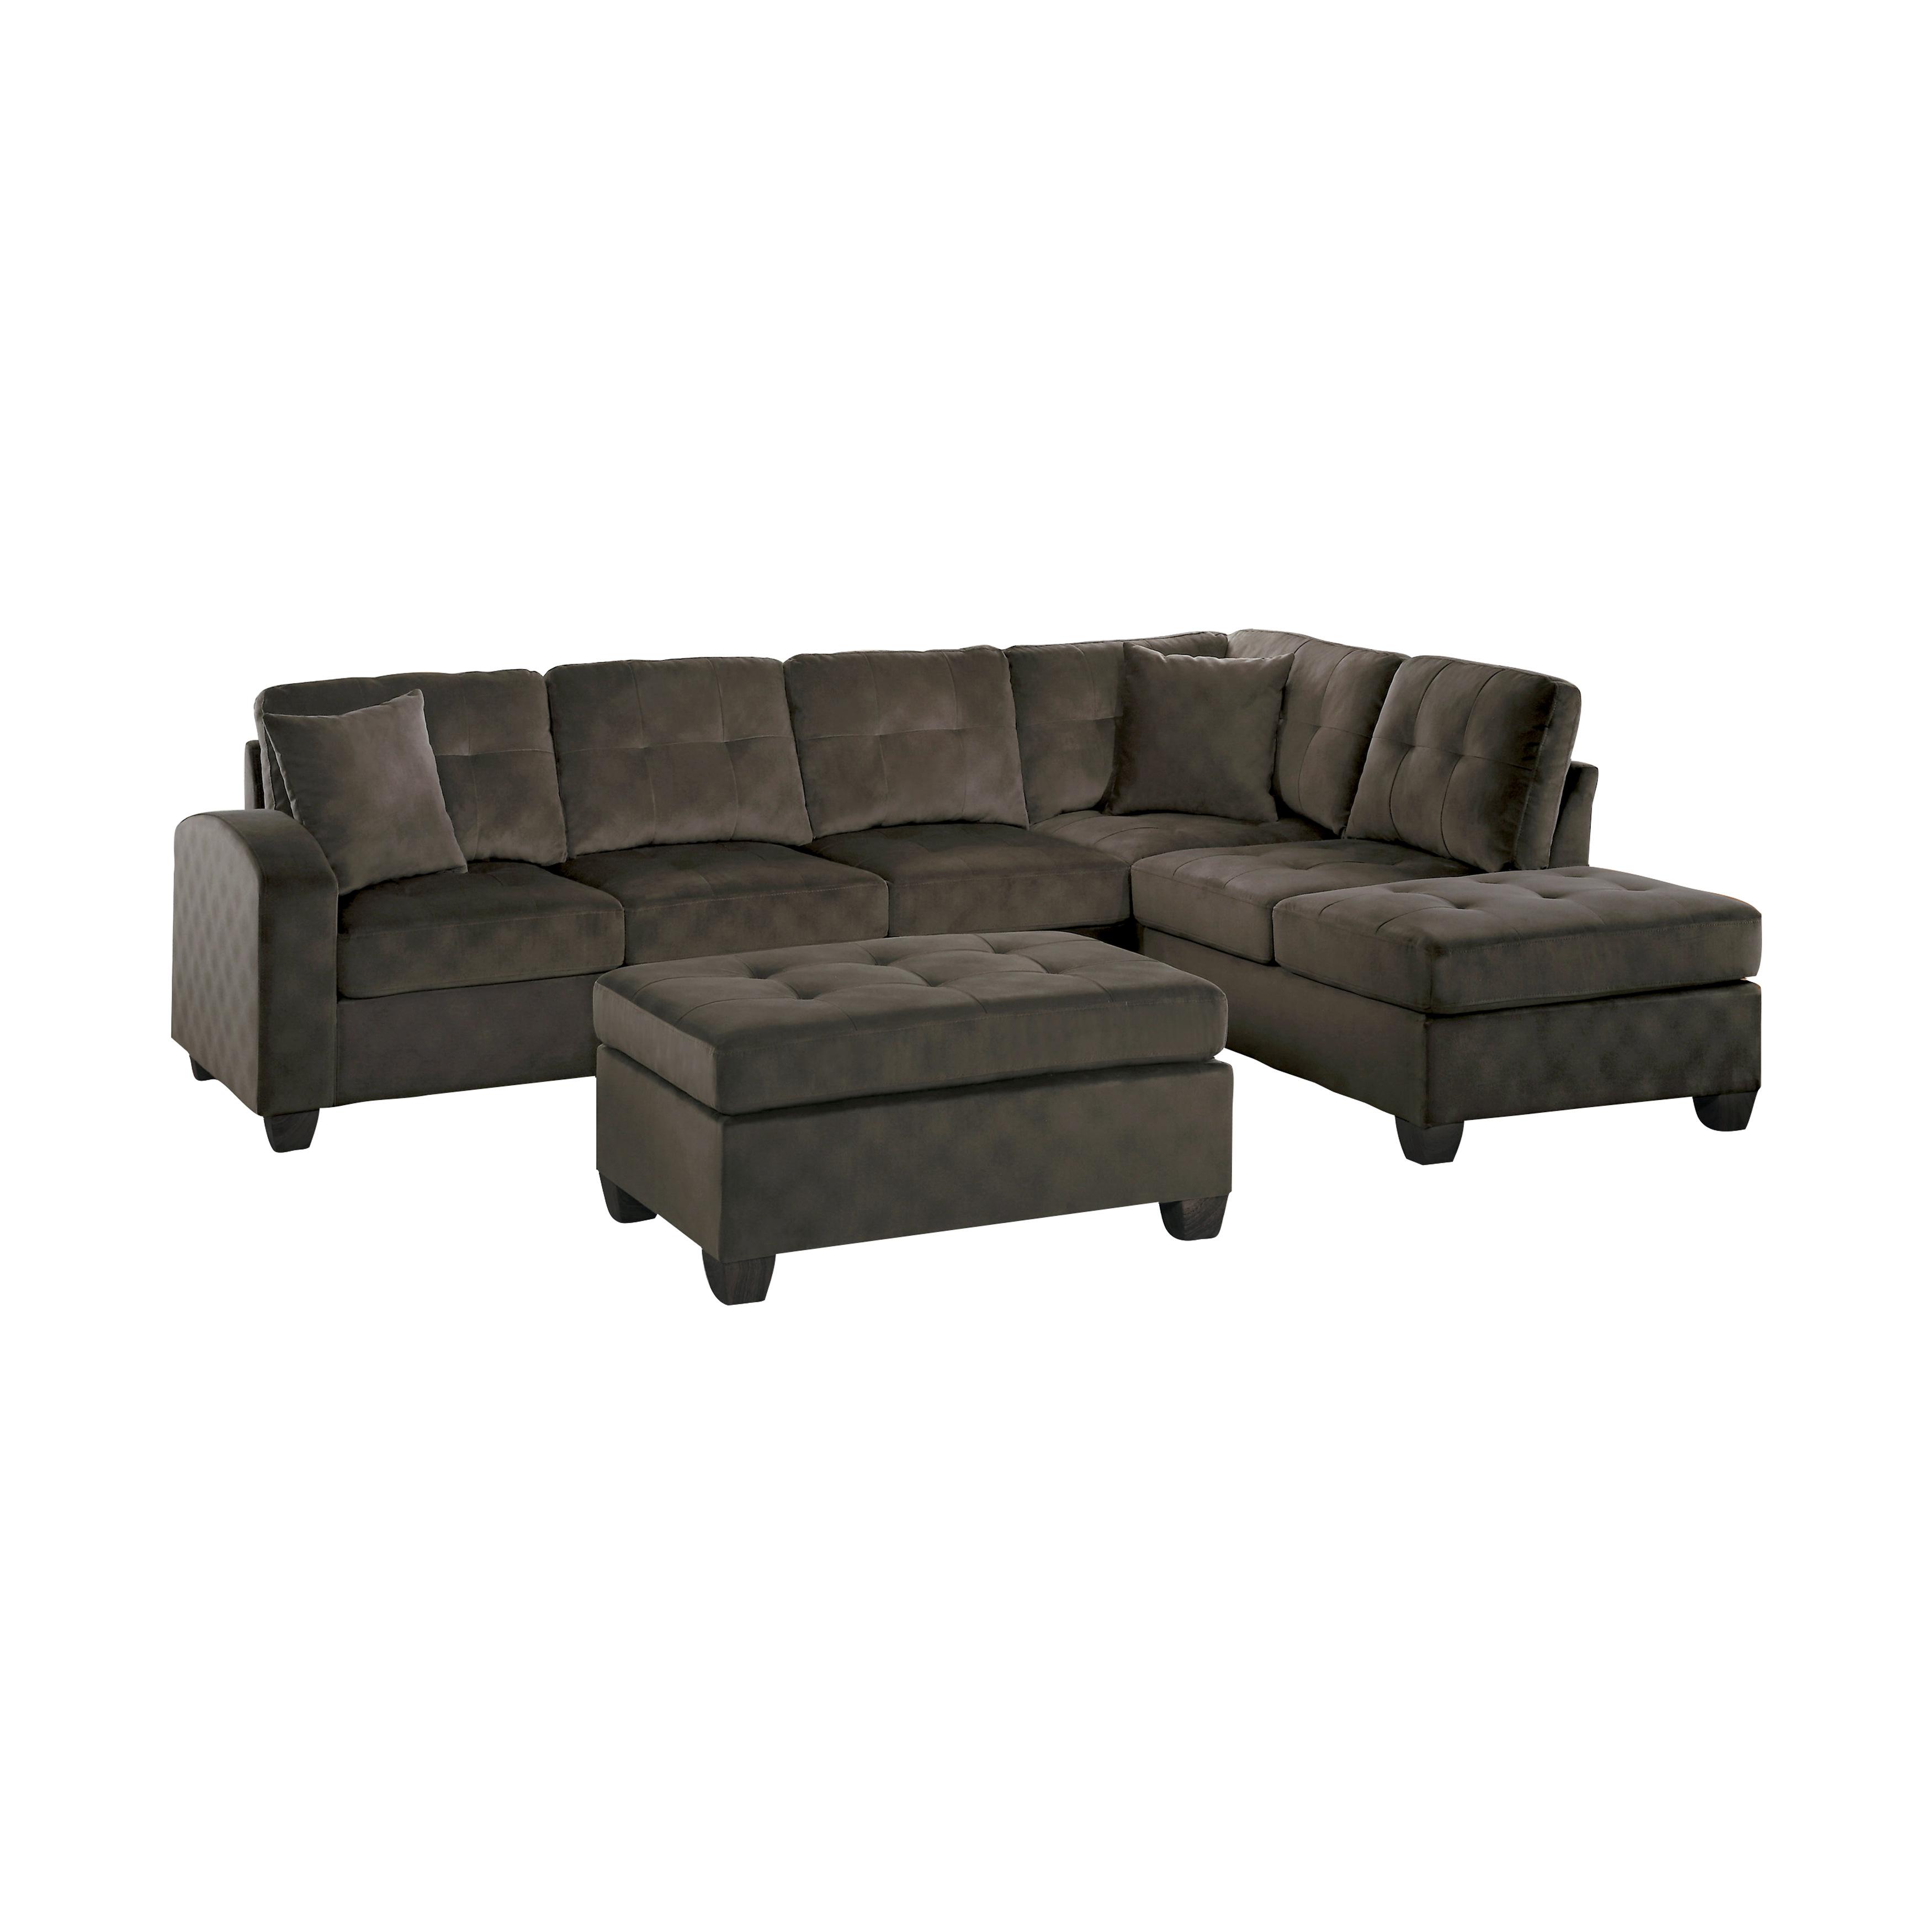 Transitional Sectional w/ Ottoman 8367CH*3 Emilio 8367CH*3 in Chocolate Fabric